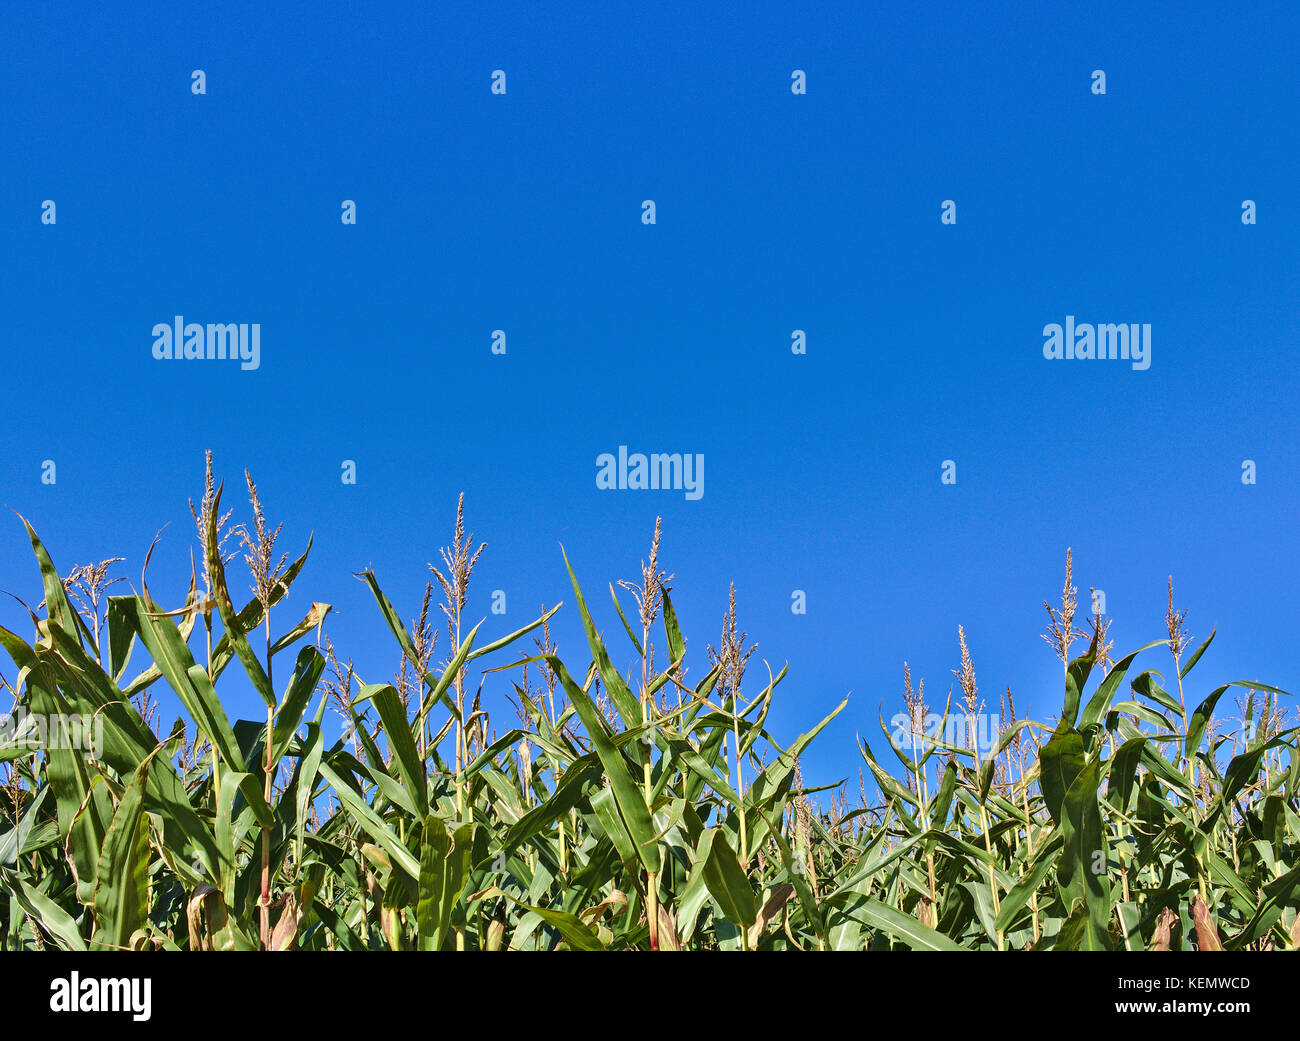 Corn stalks with deep blue sky in the background Stock Photo